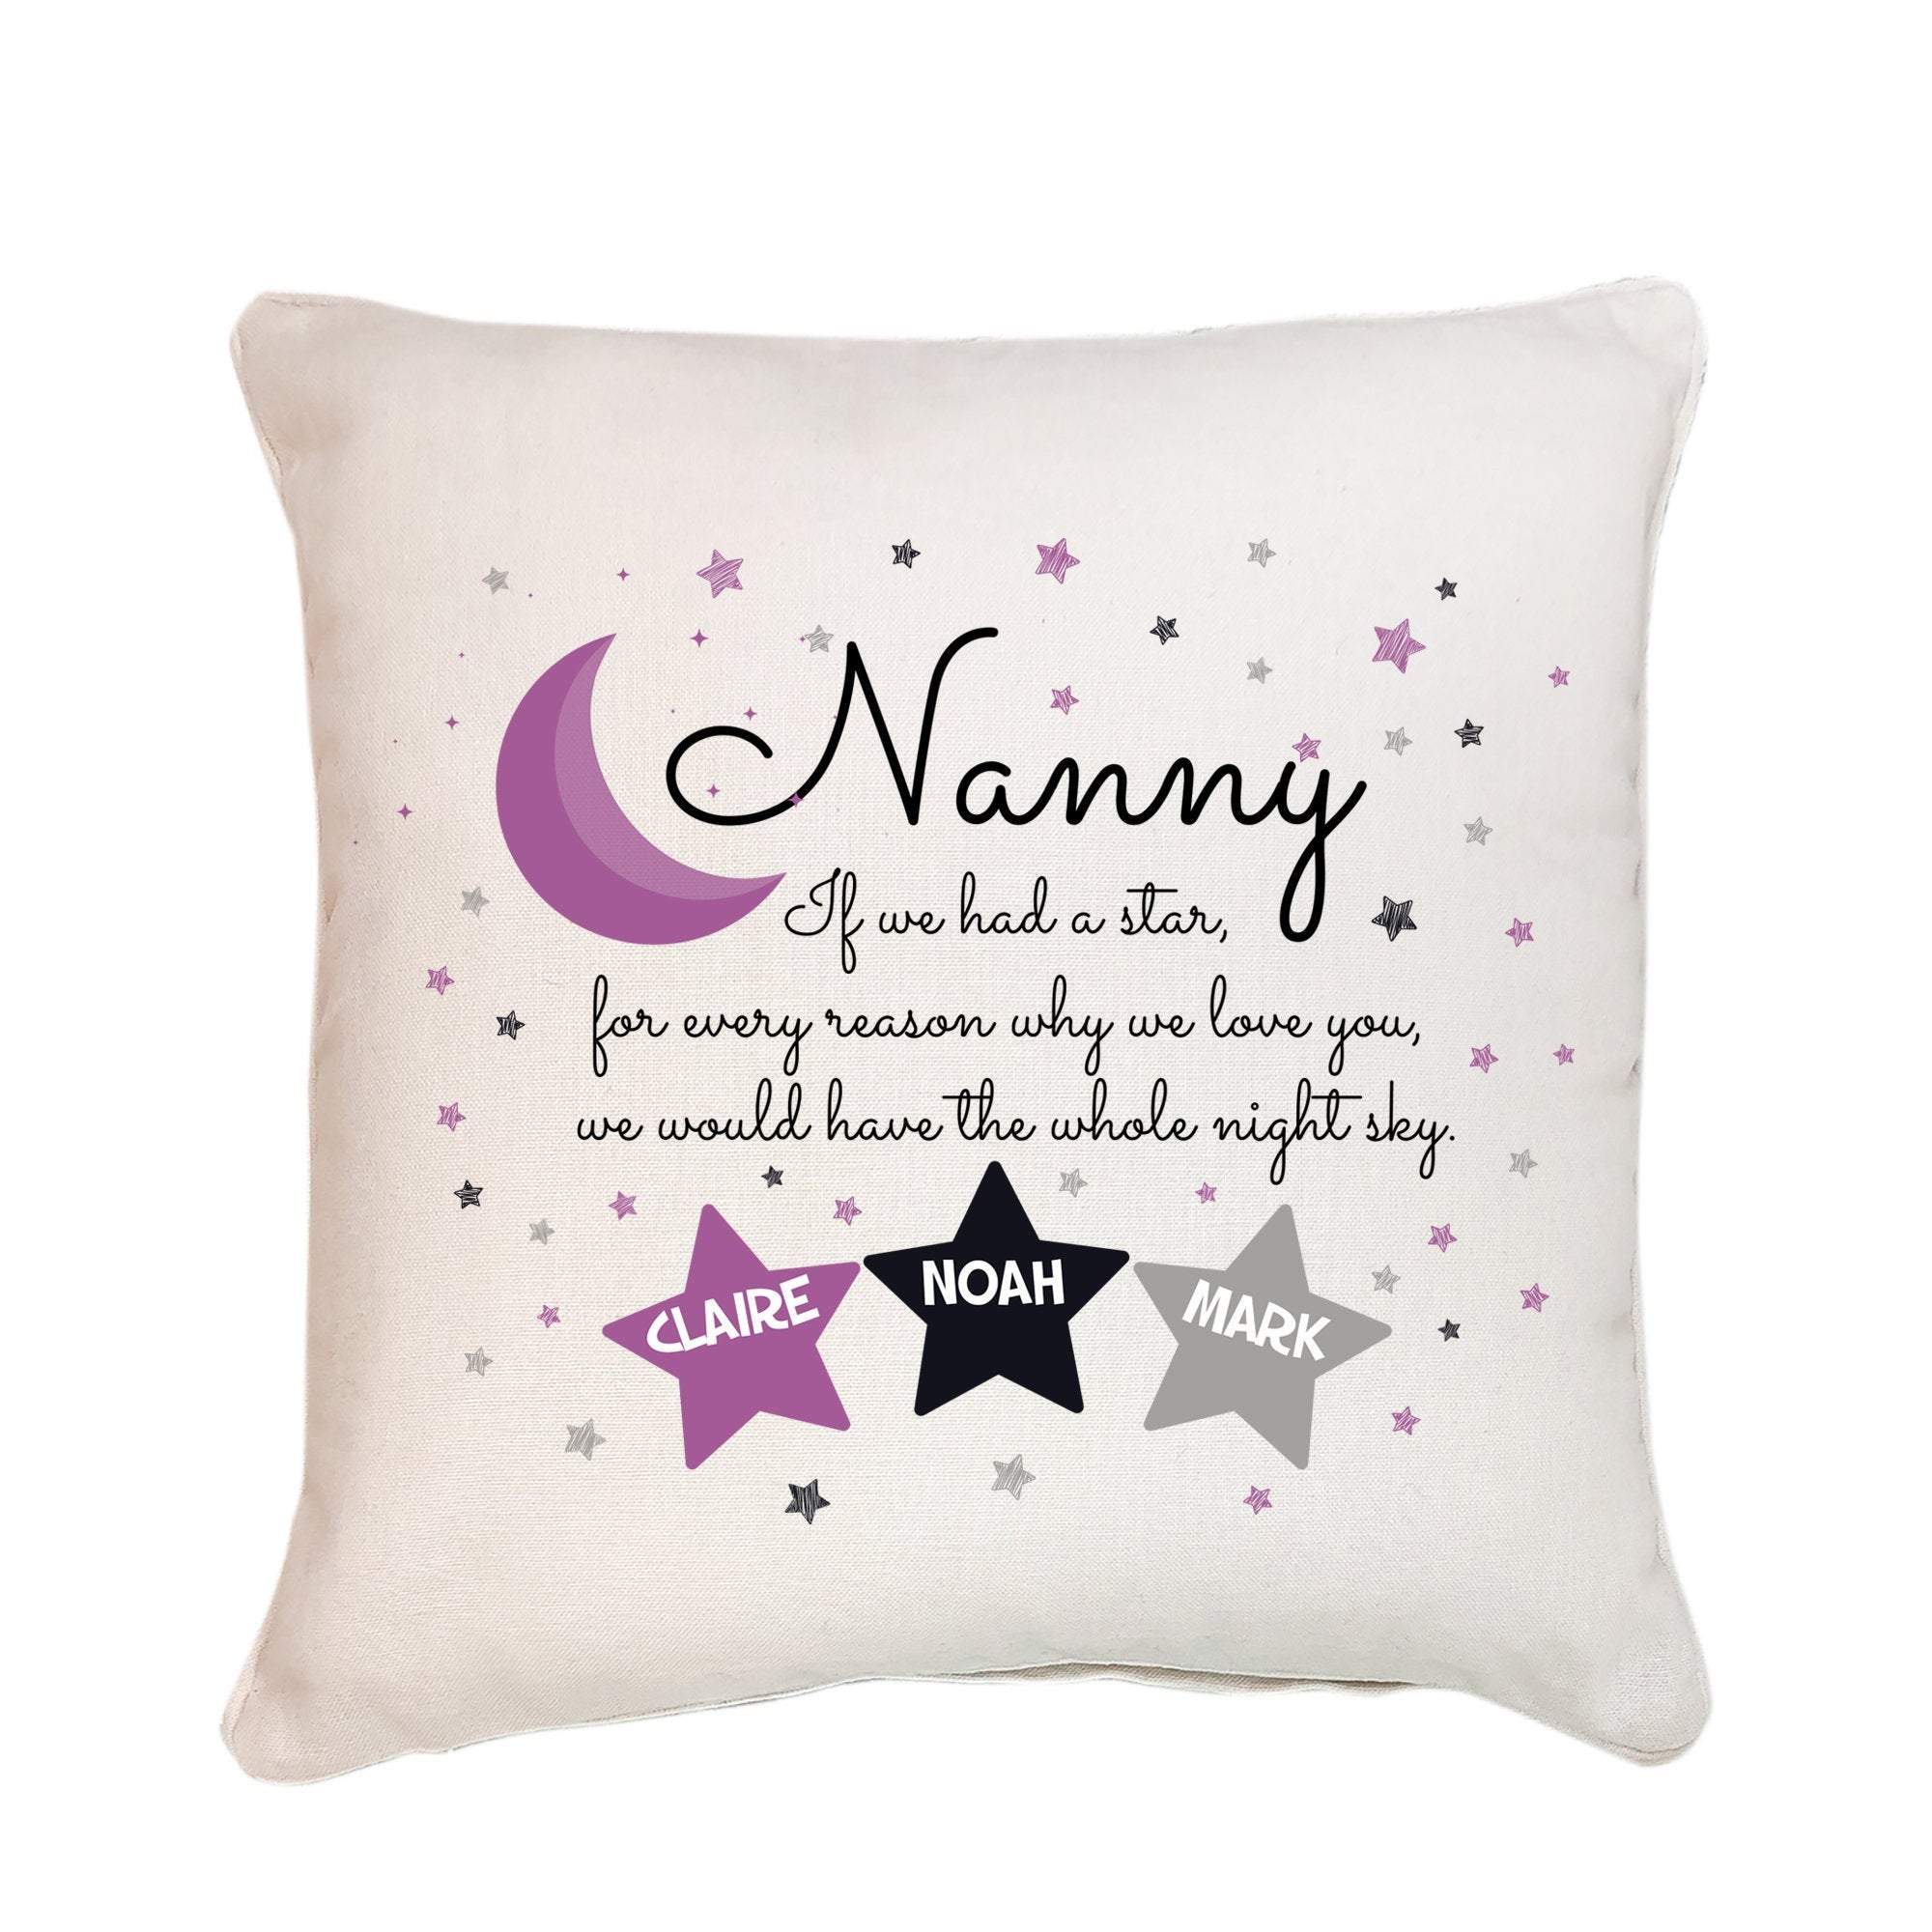 Personalised cushion for nanny, Mother's Day gift for grandma